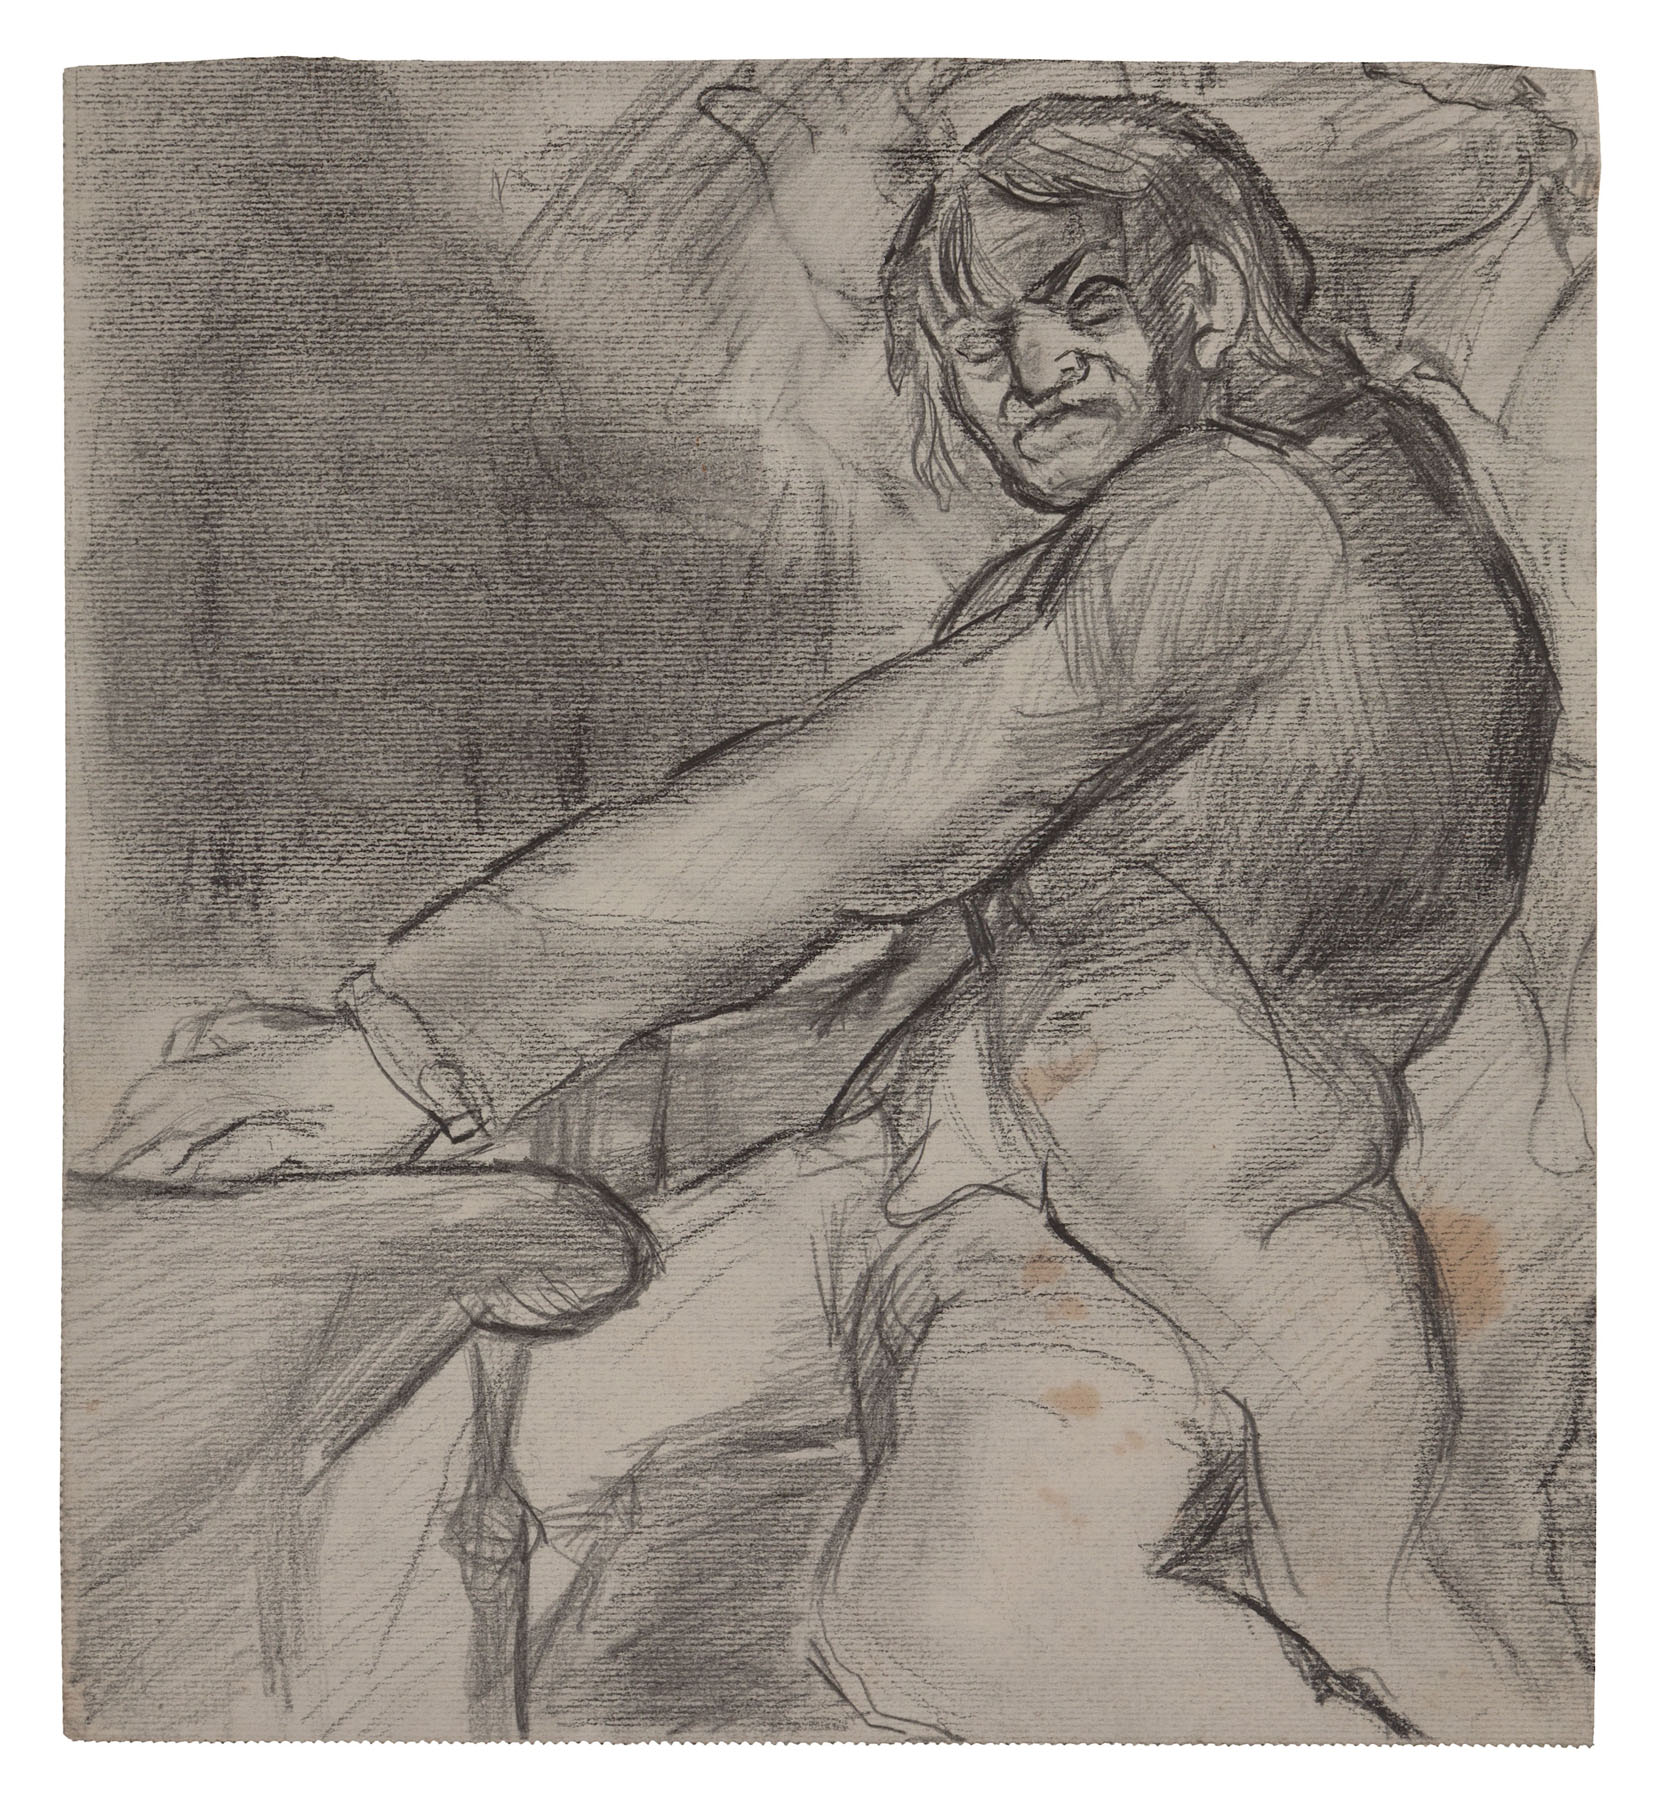 Fritz Ascher, Beethoven, c. 1920. Graphite on paper, 10 x 9 in. (25.3 x 23 cm). Private collection. Photo Malcolm Varon ©Bianca Stock